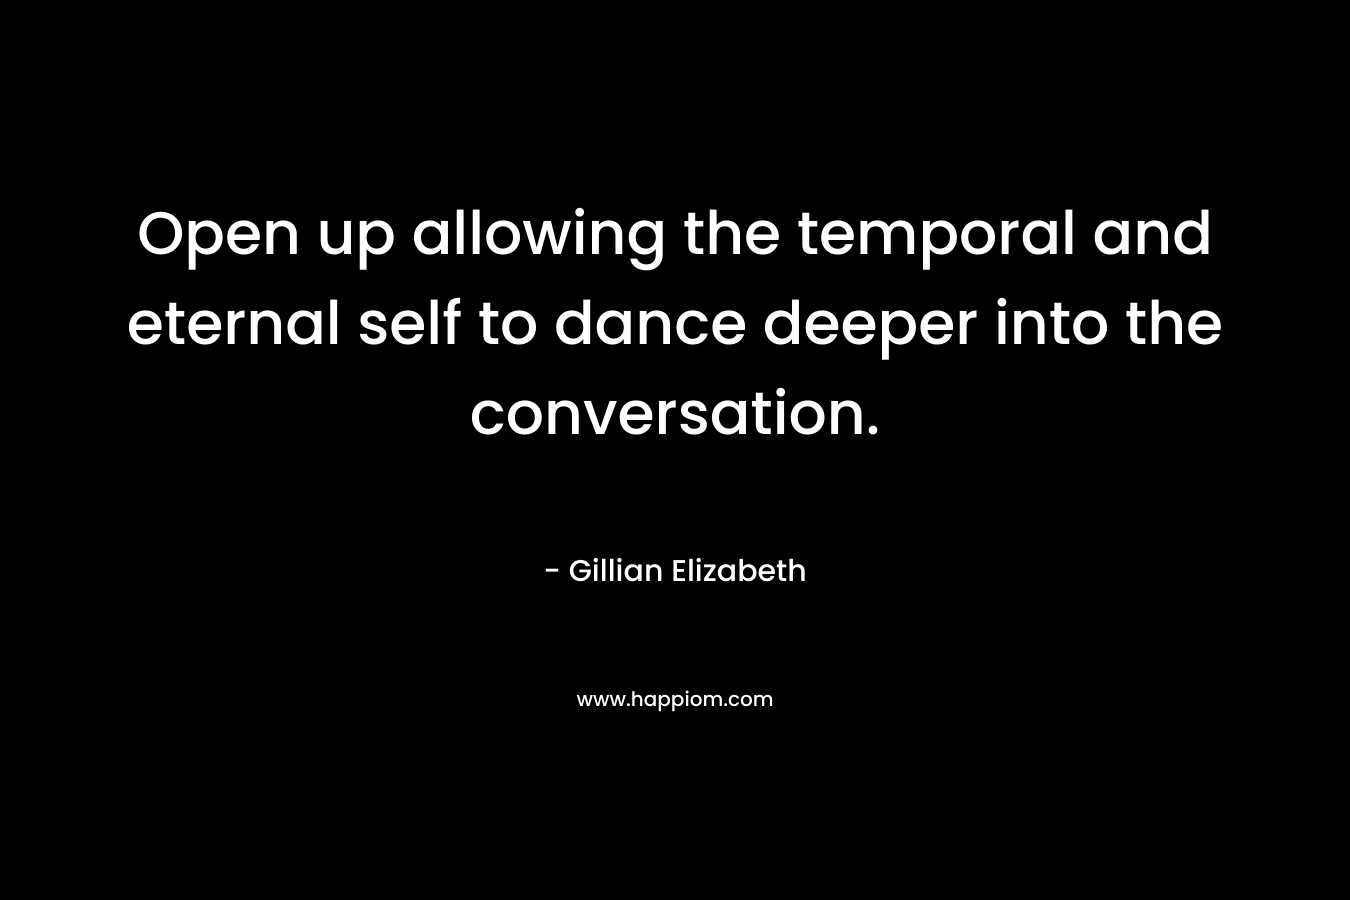 Open up allowing the temporal and eternal self to dance deeper into the conversation. – Gillian Elizabeth